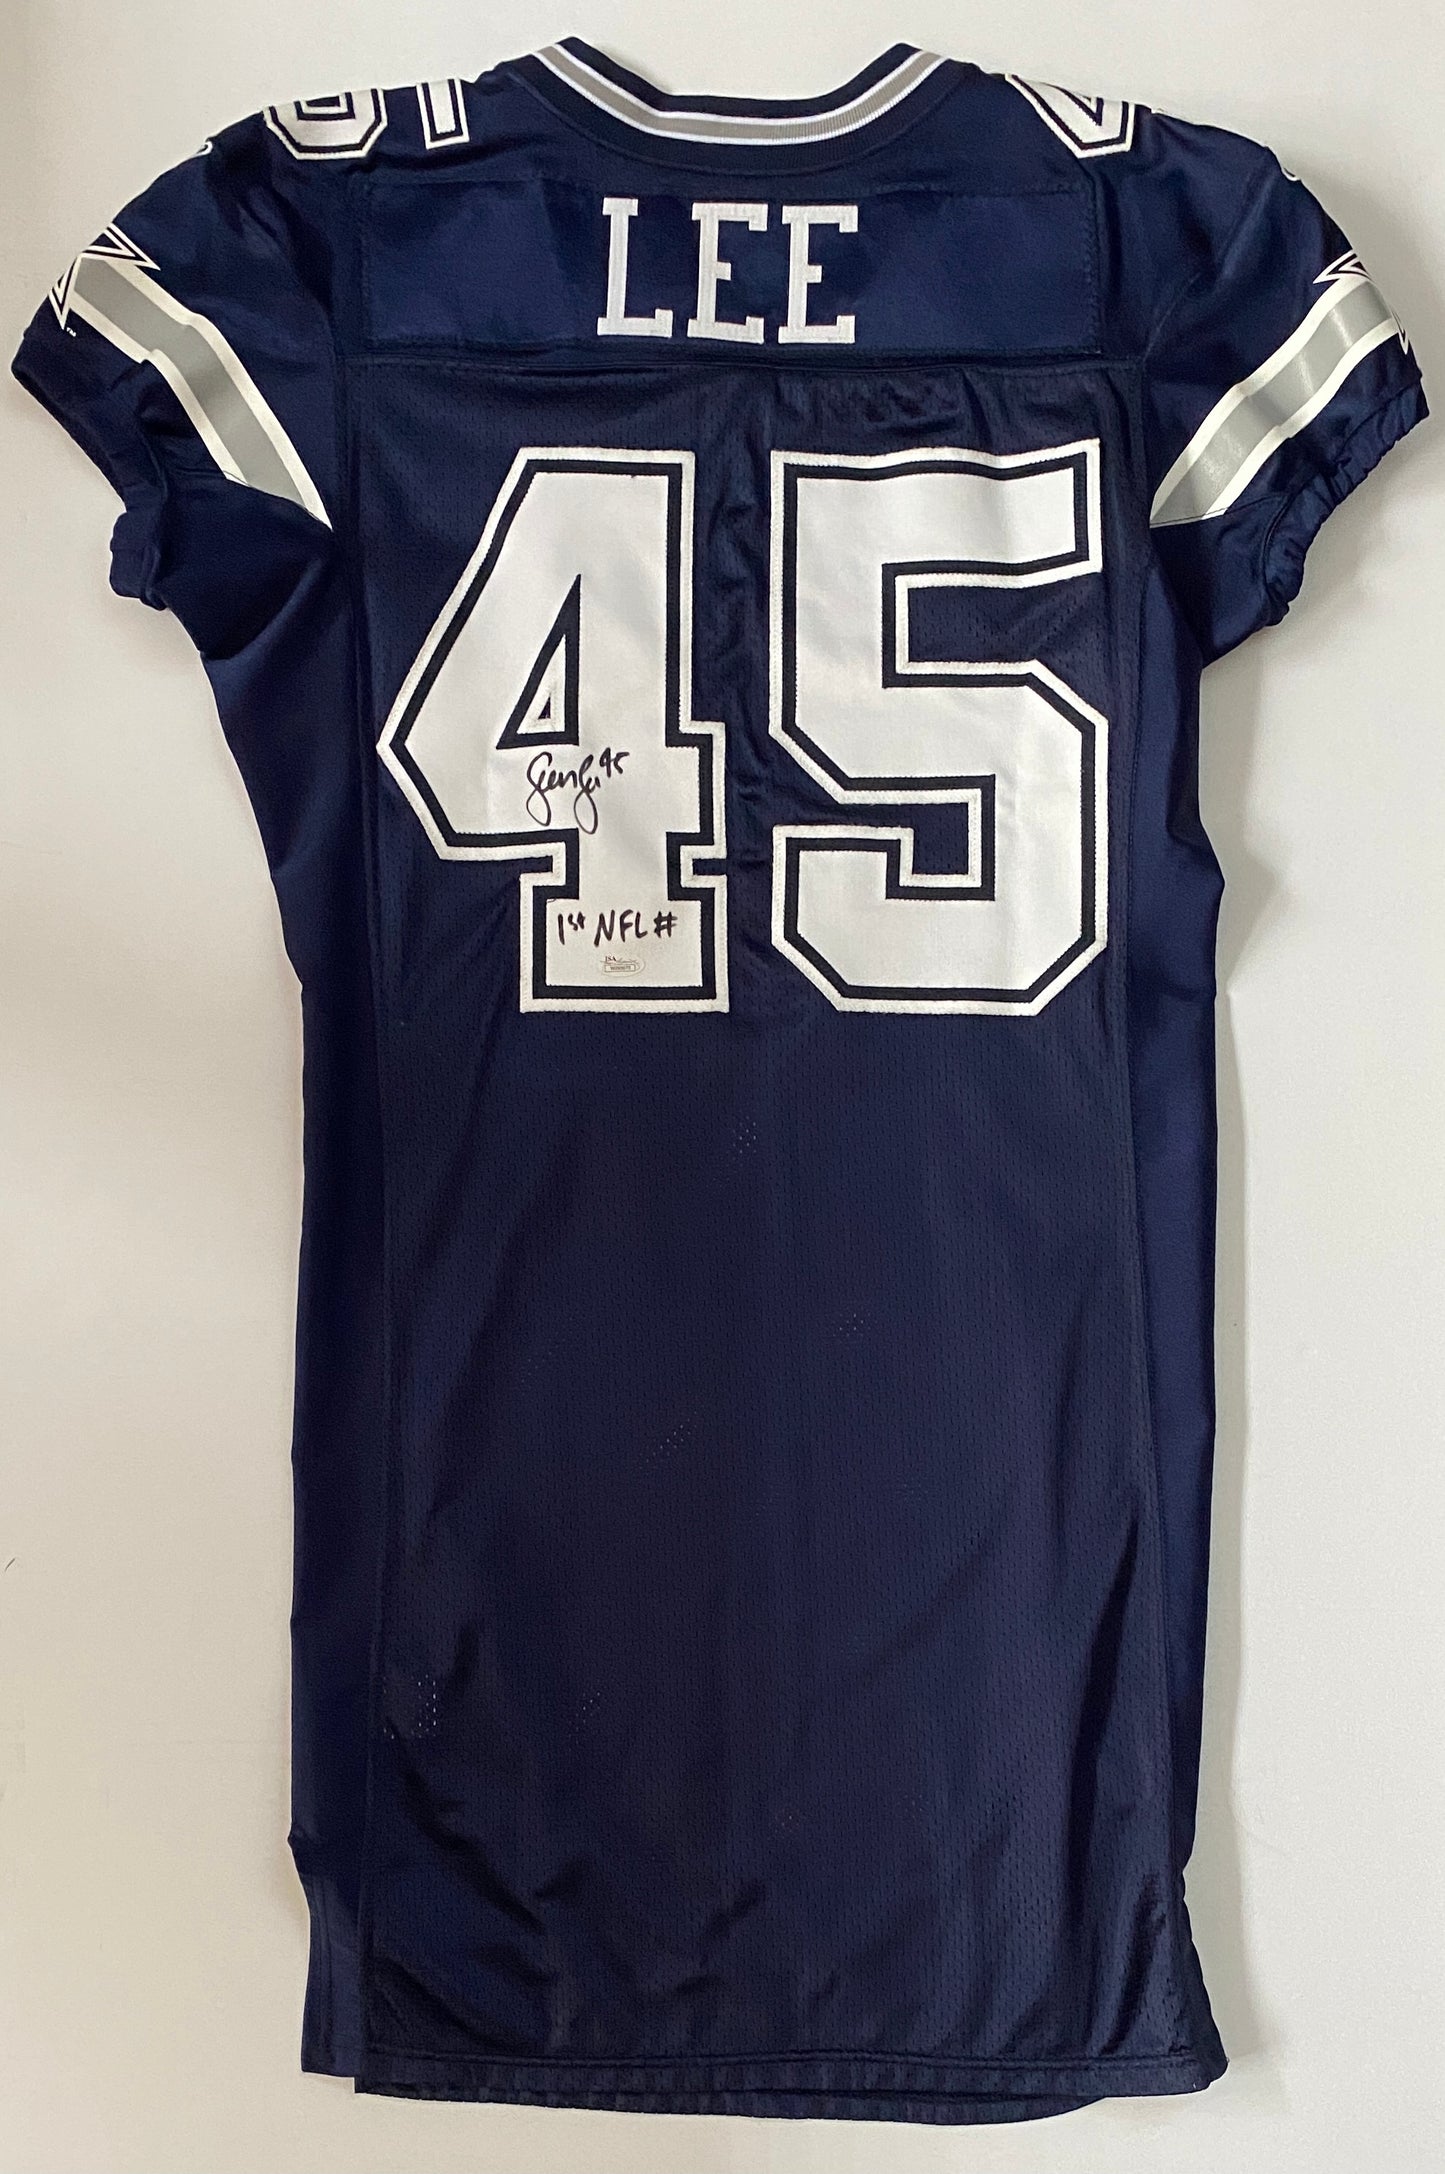 Sean Lee Signed Team Issued Jersey Inscribed “1st NFL #”